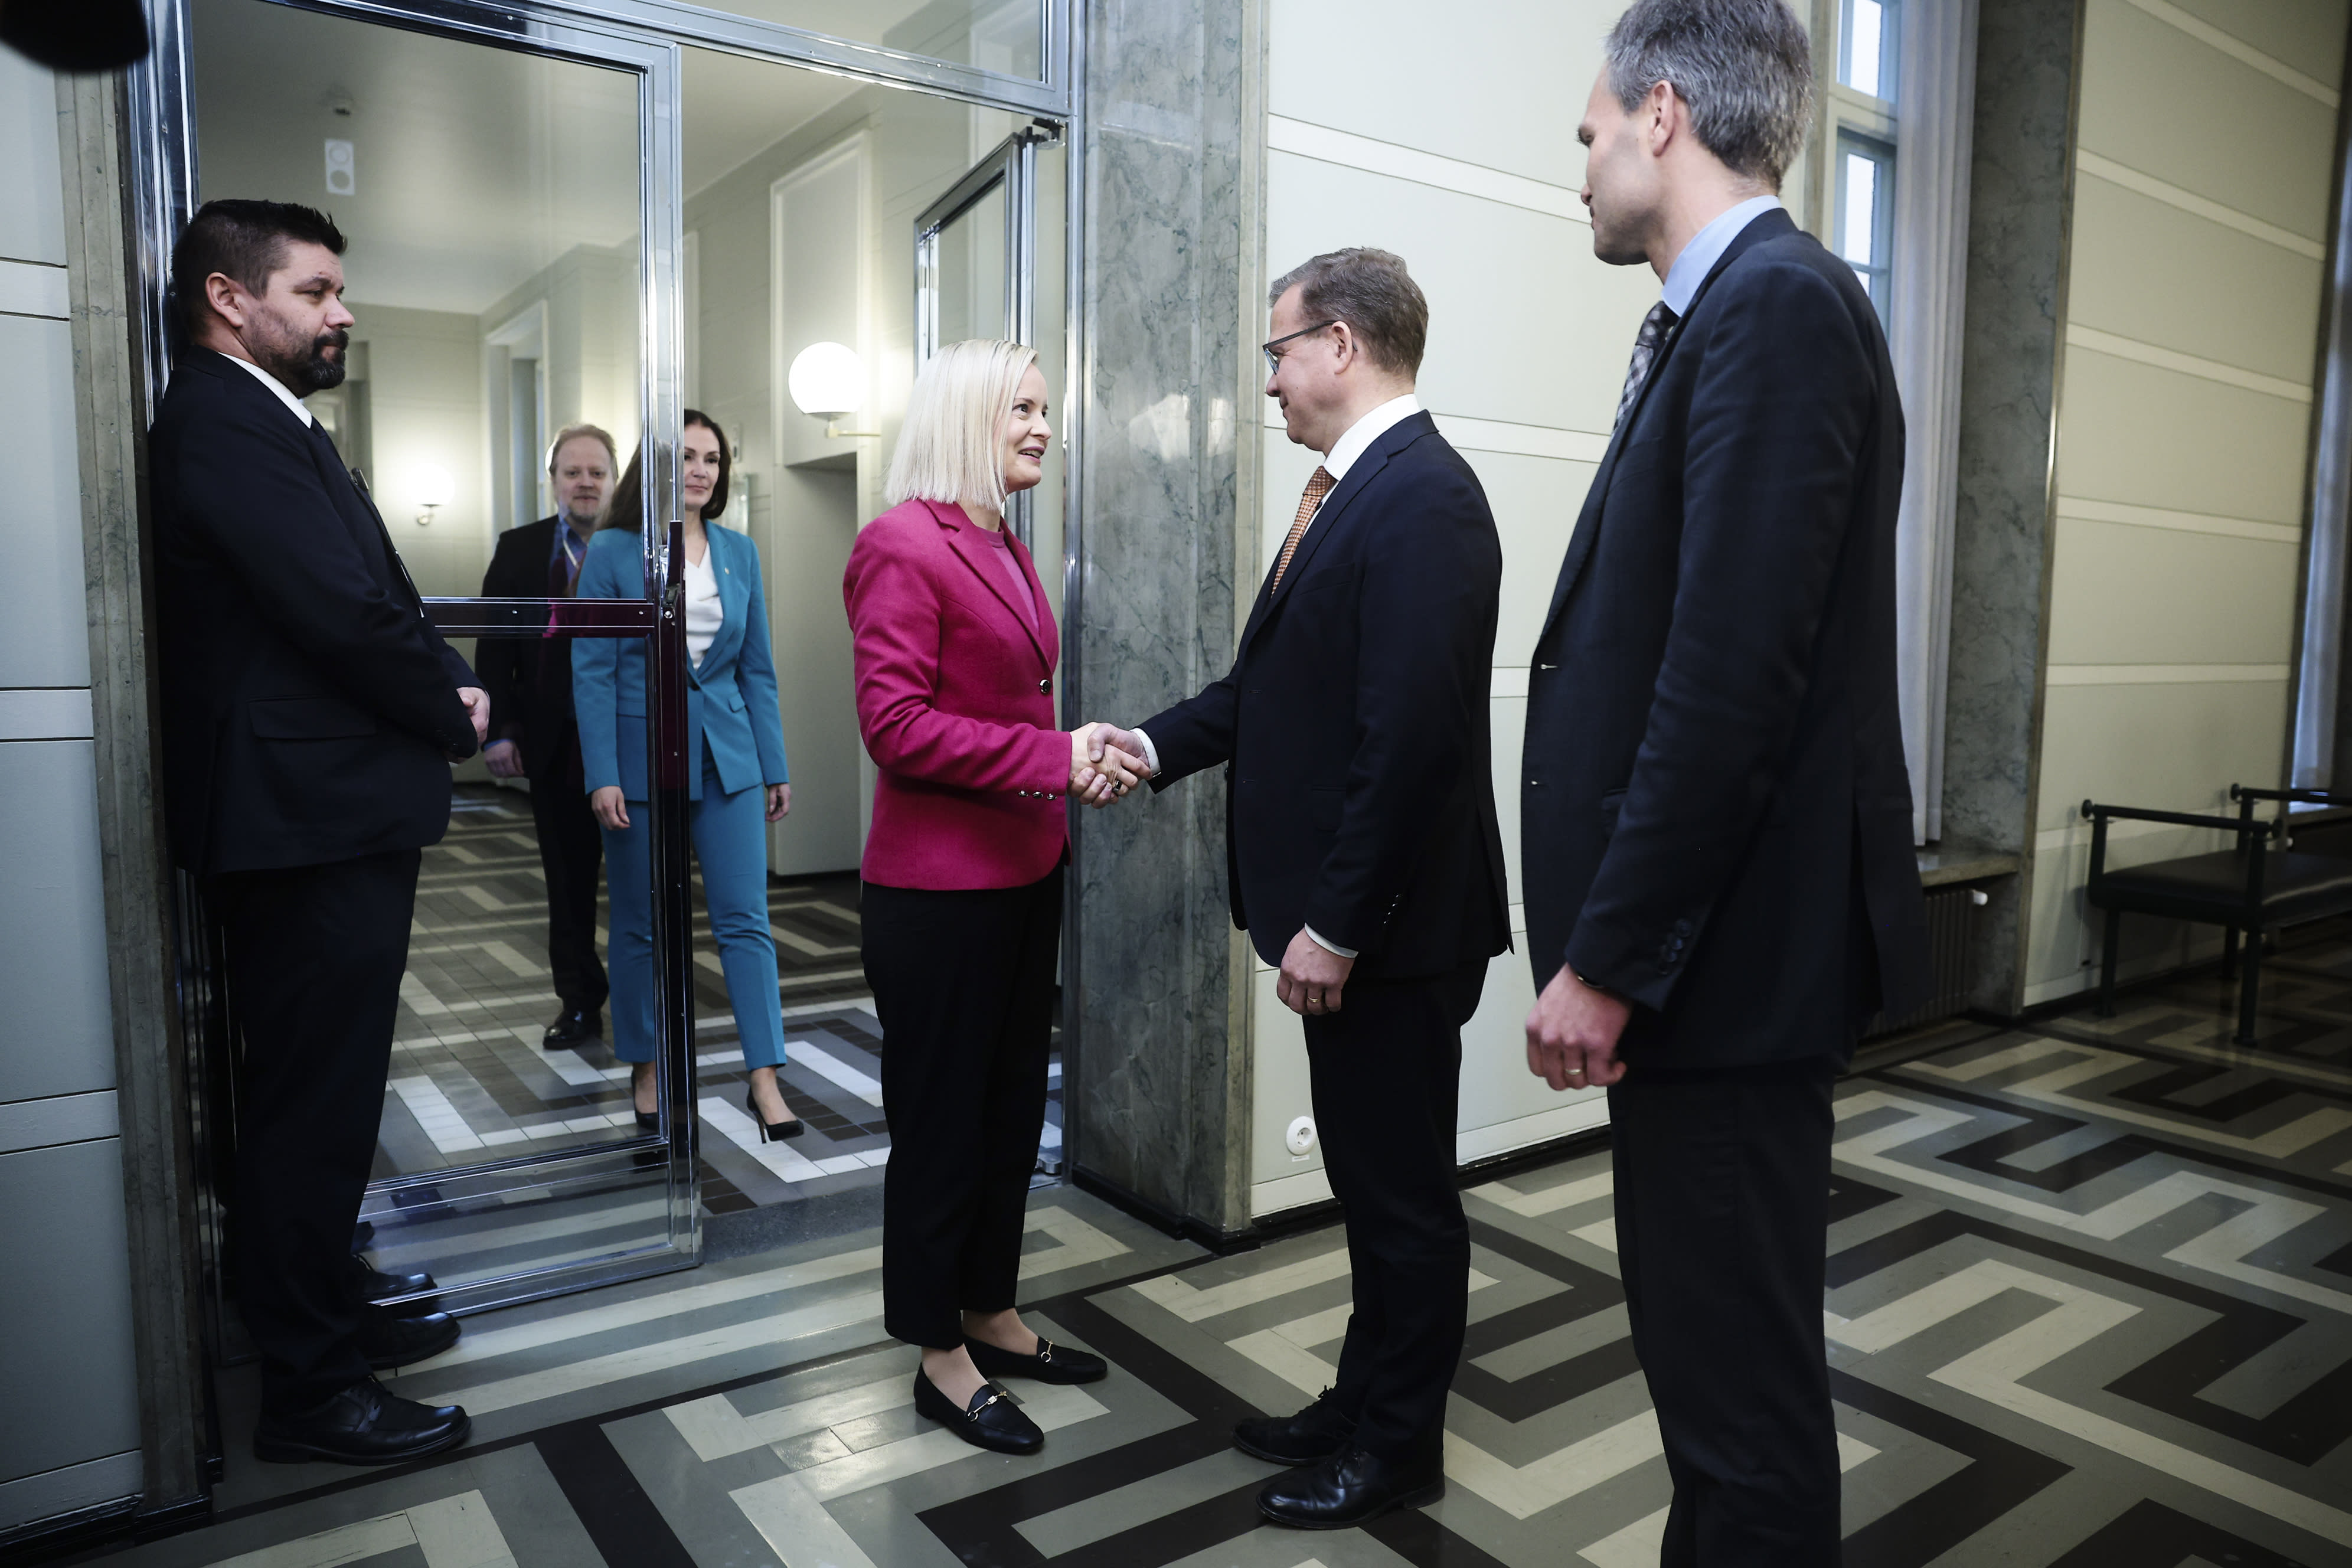 Riikka Purra: Basic Finns are ready for “difficult” coalition negotiations with the NCP